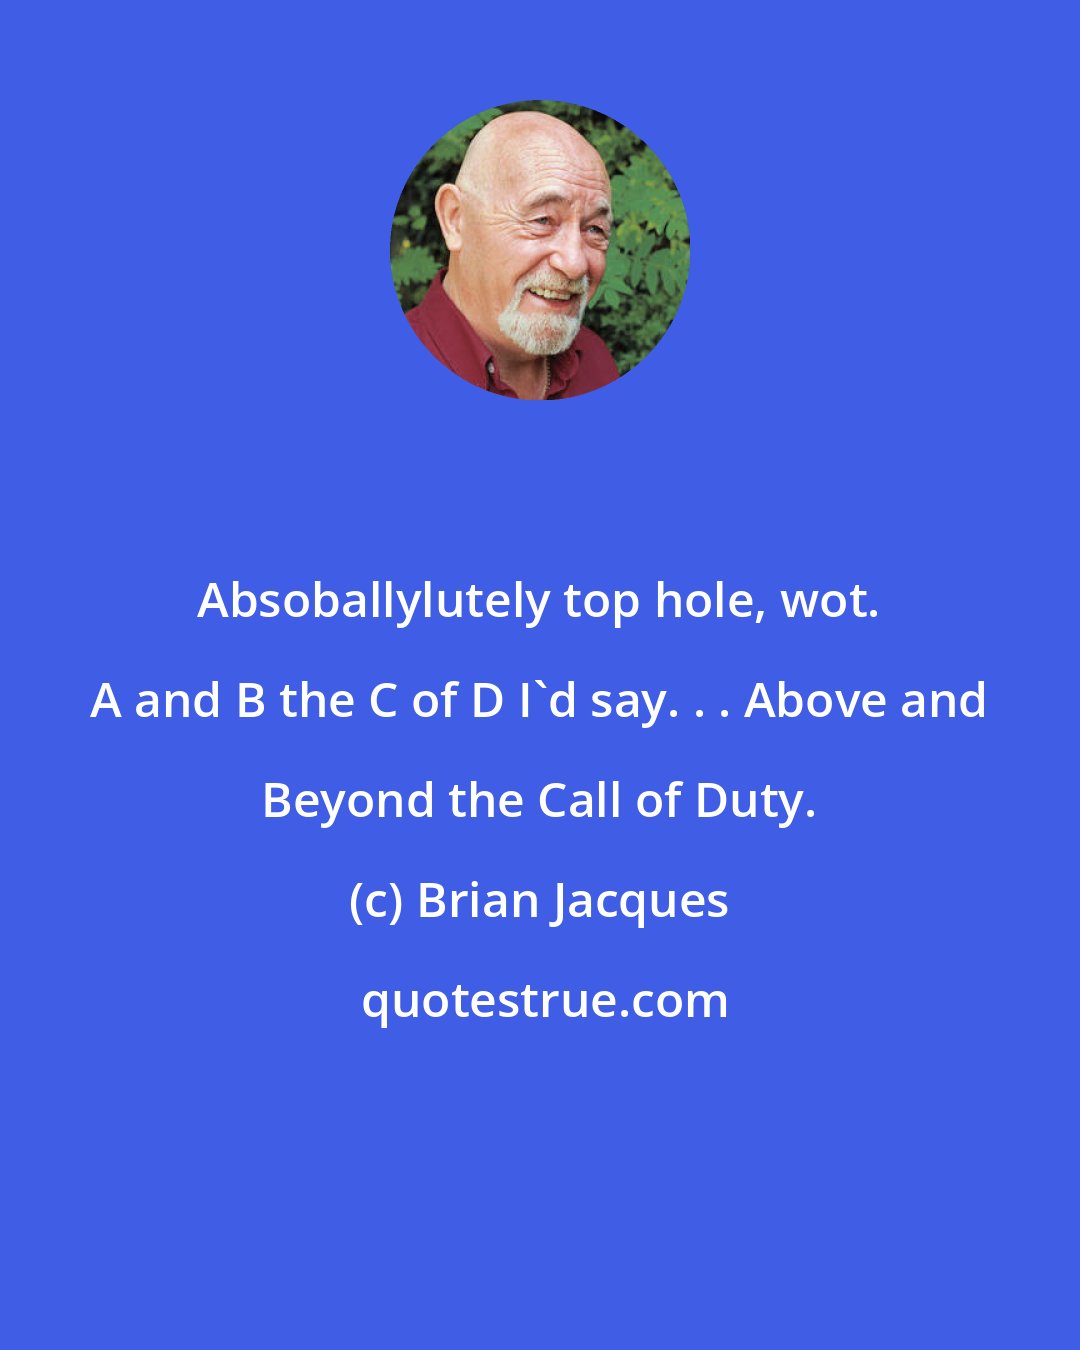 Brian Jacques: Absoballylutely top hole, wot. A and B the C of D I'd say. . . Above and Beyond the Call of Duty.